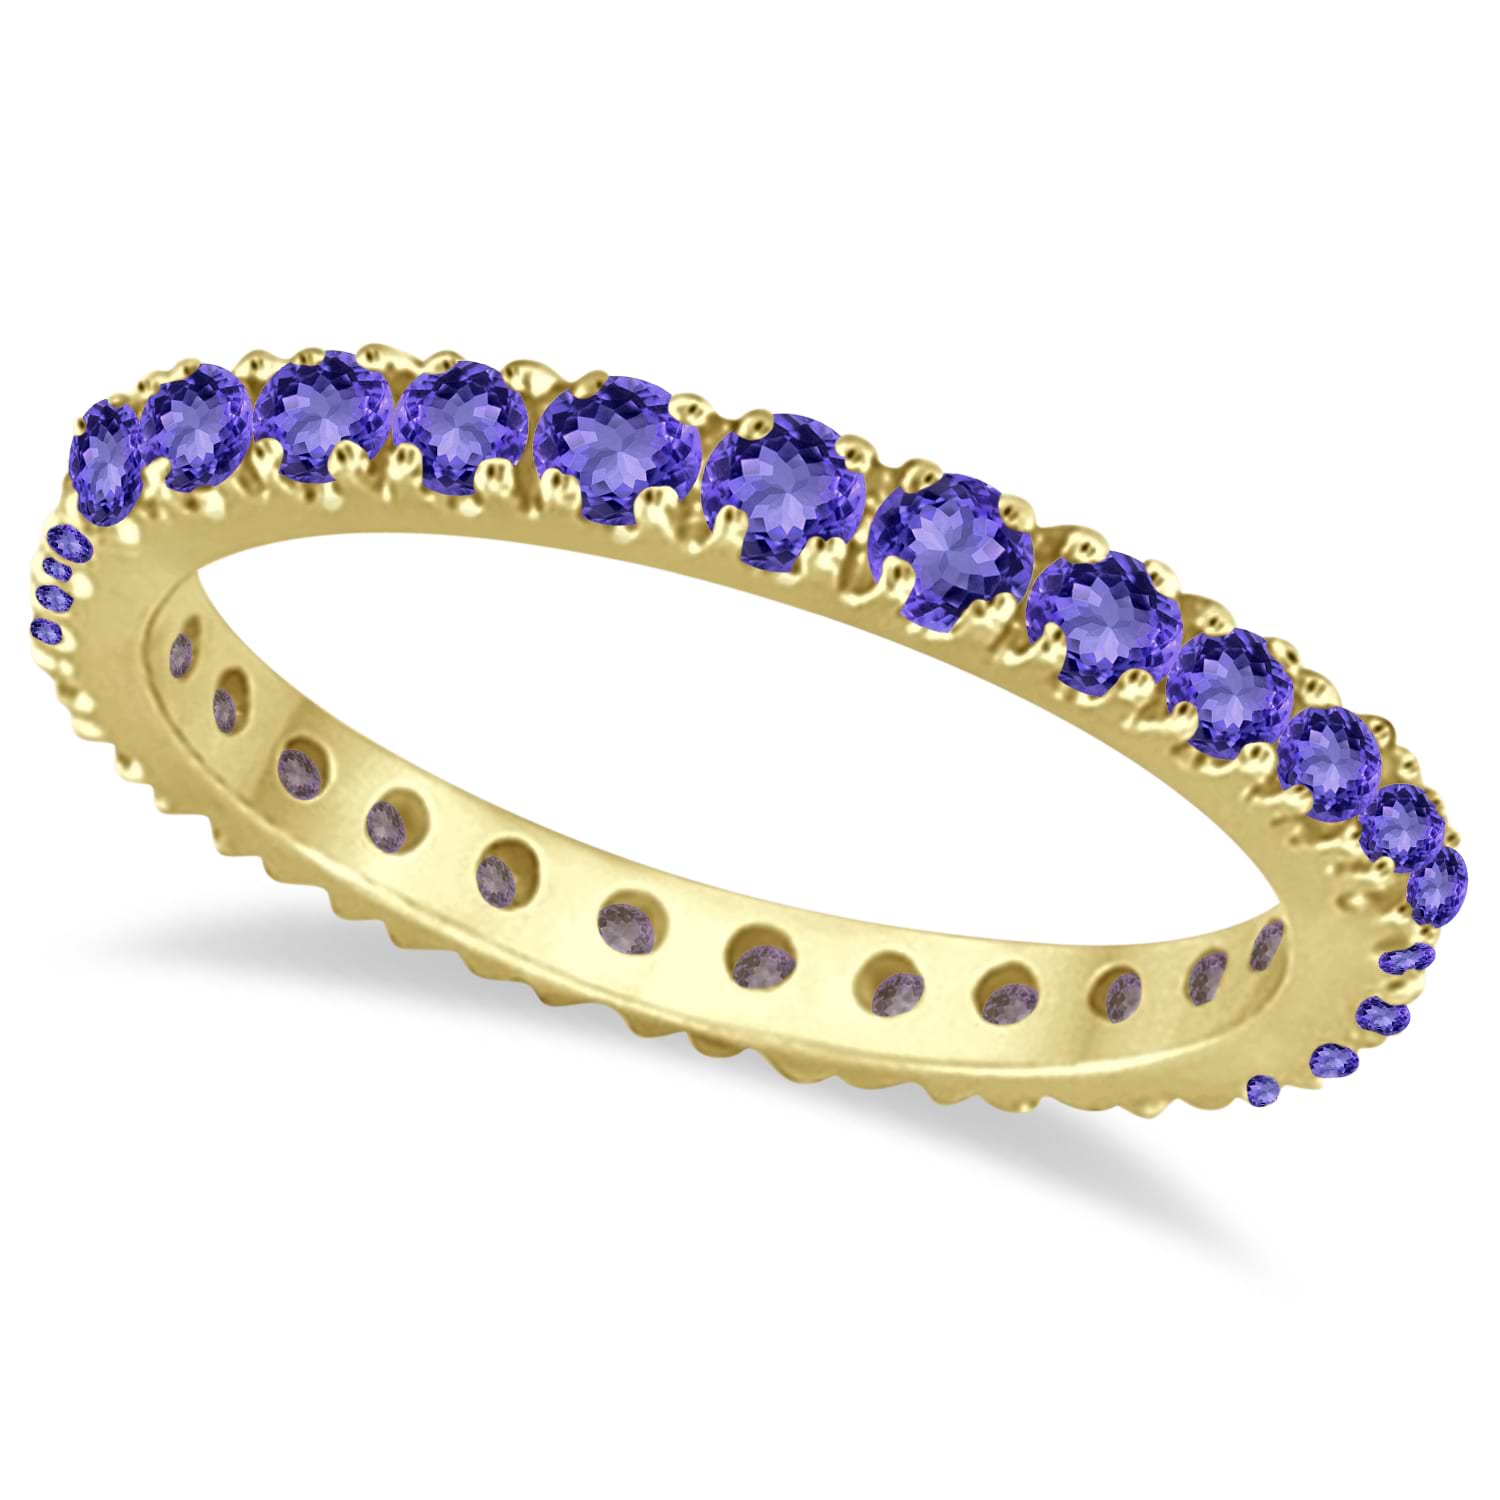 Tanzanite Eternity Stackable Ring Band 14K Yellow Gold (0.75ct)